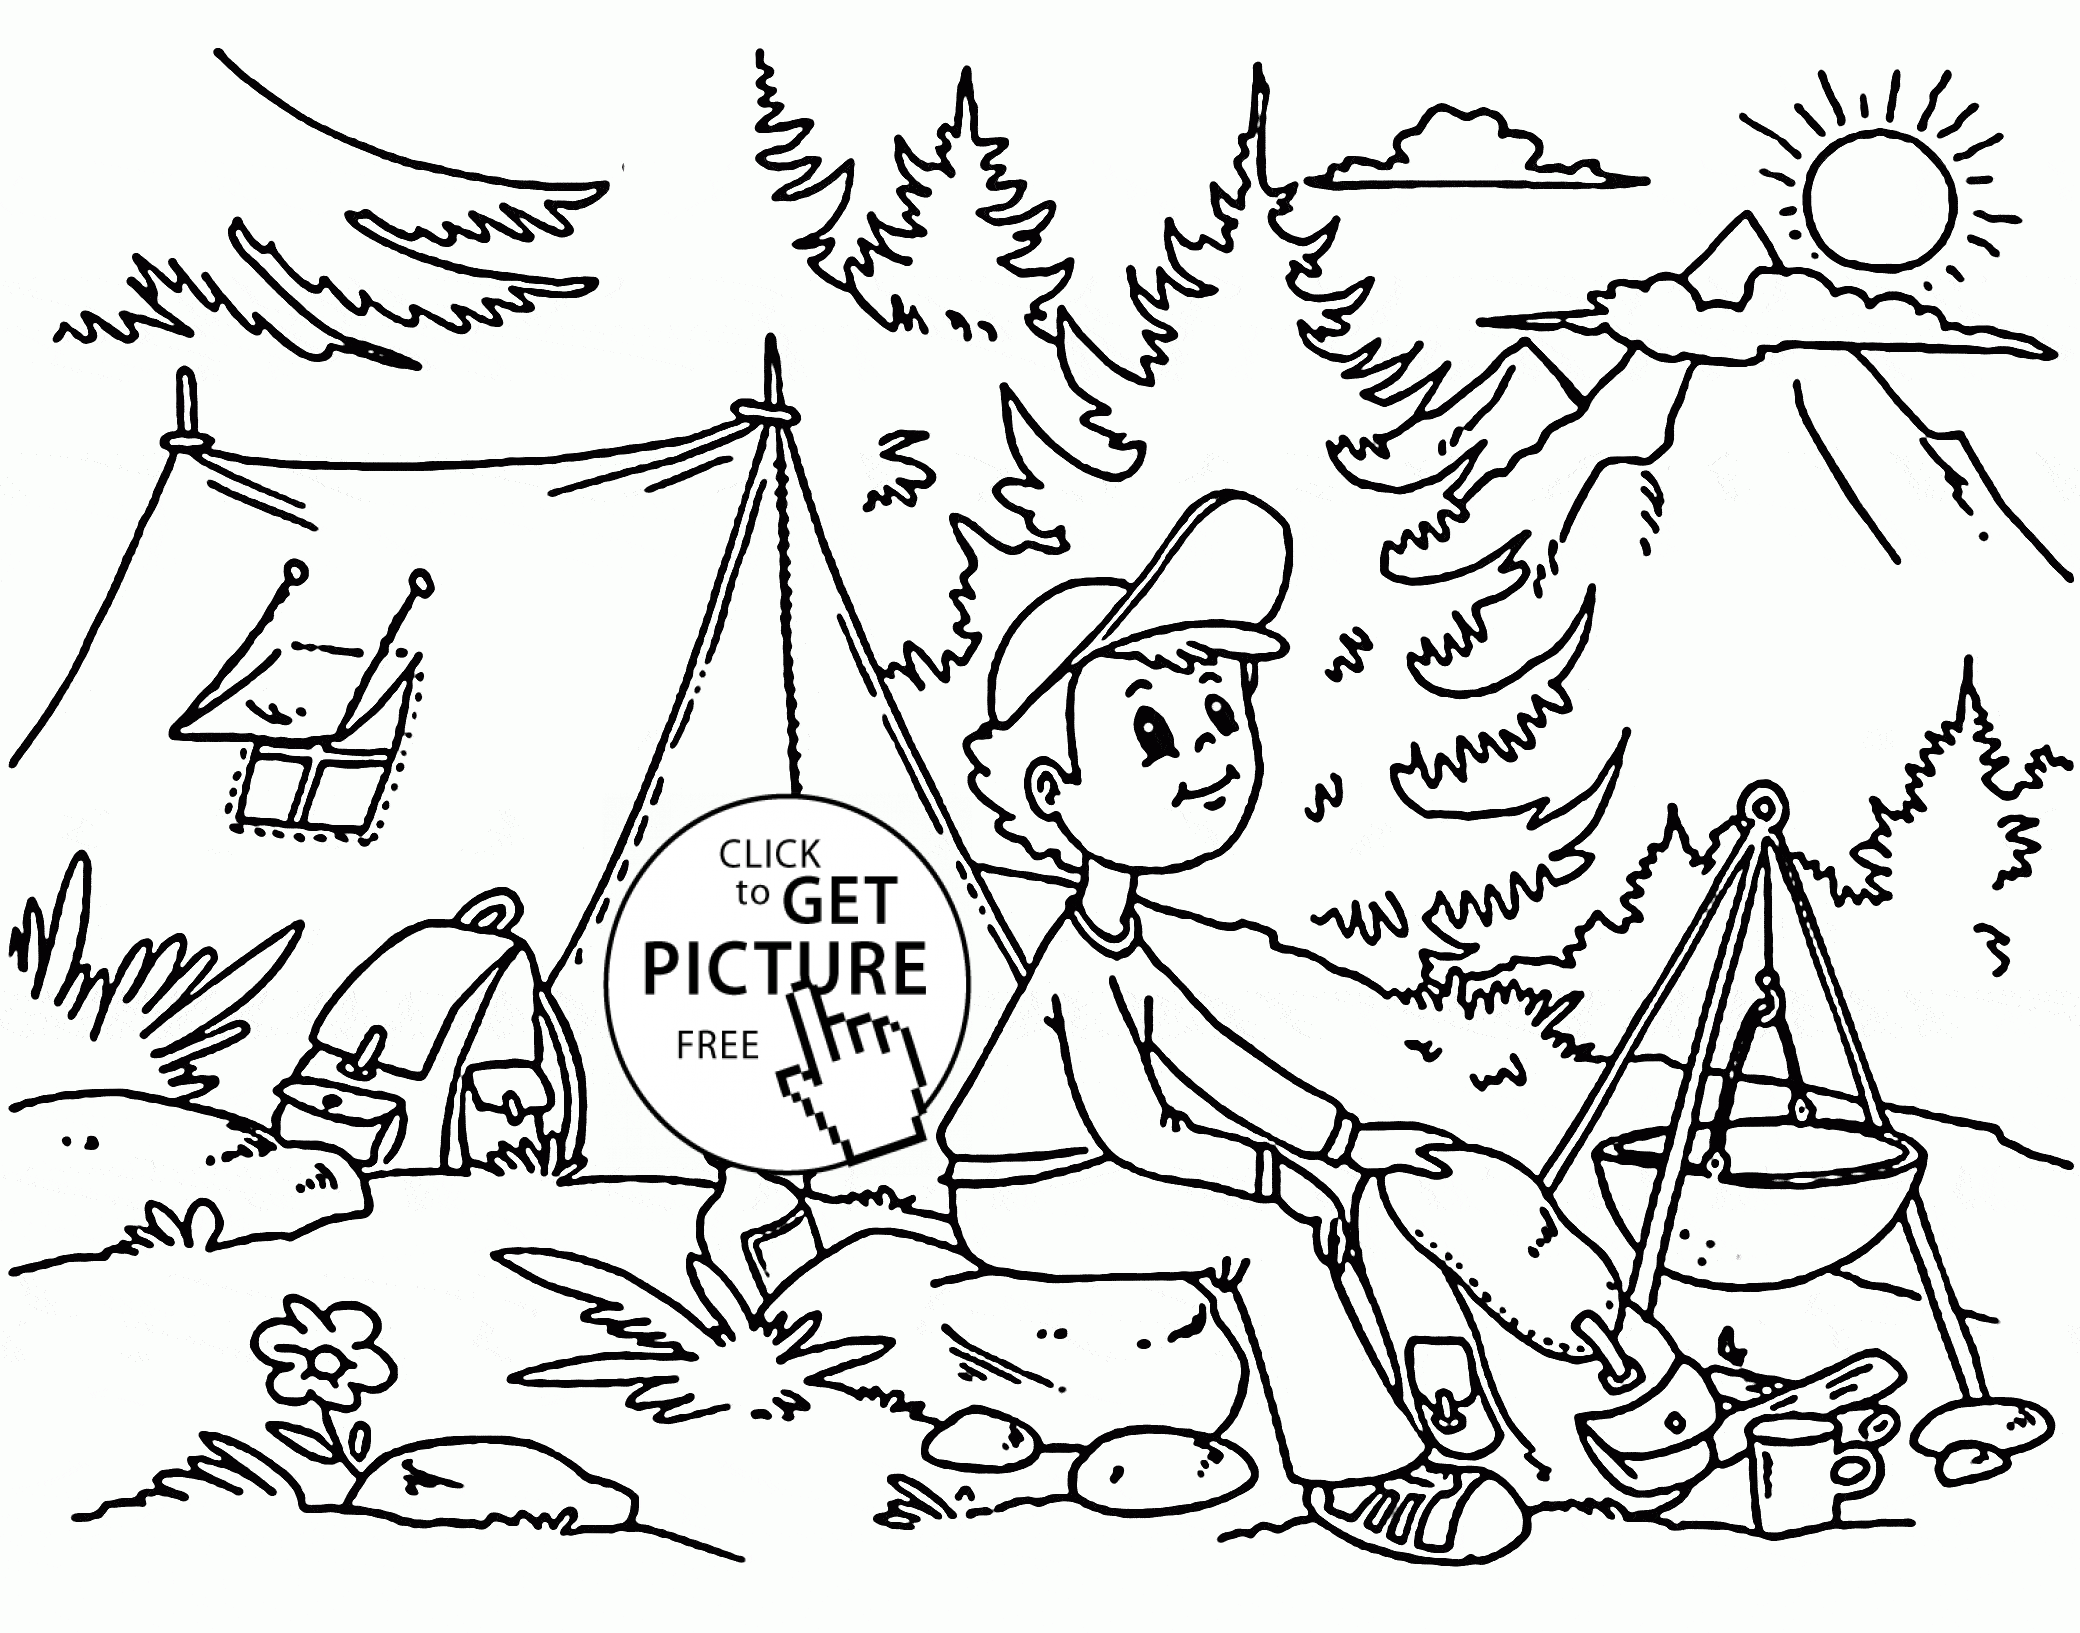 camping-color-pages-for-kids-clip-art-library